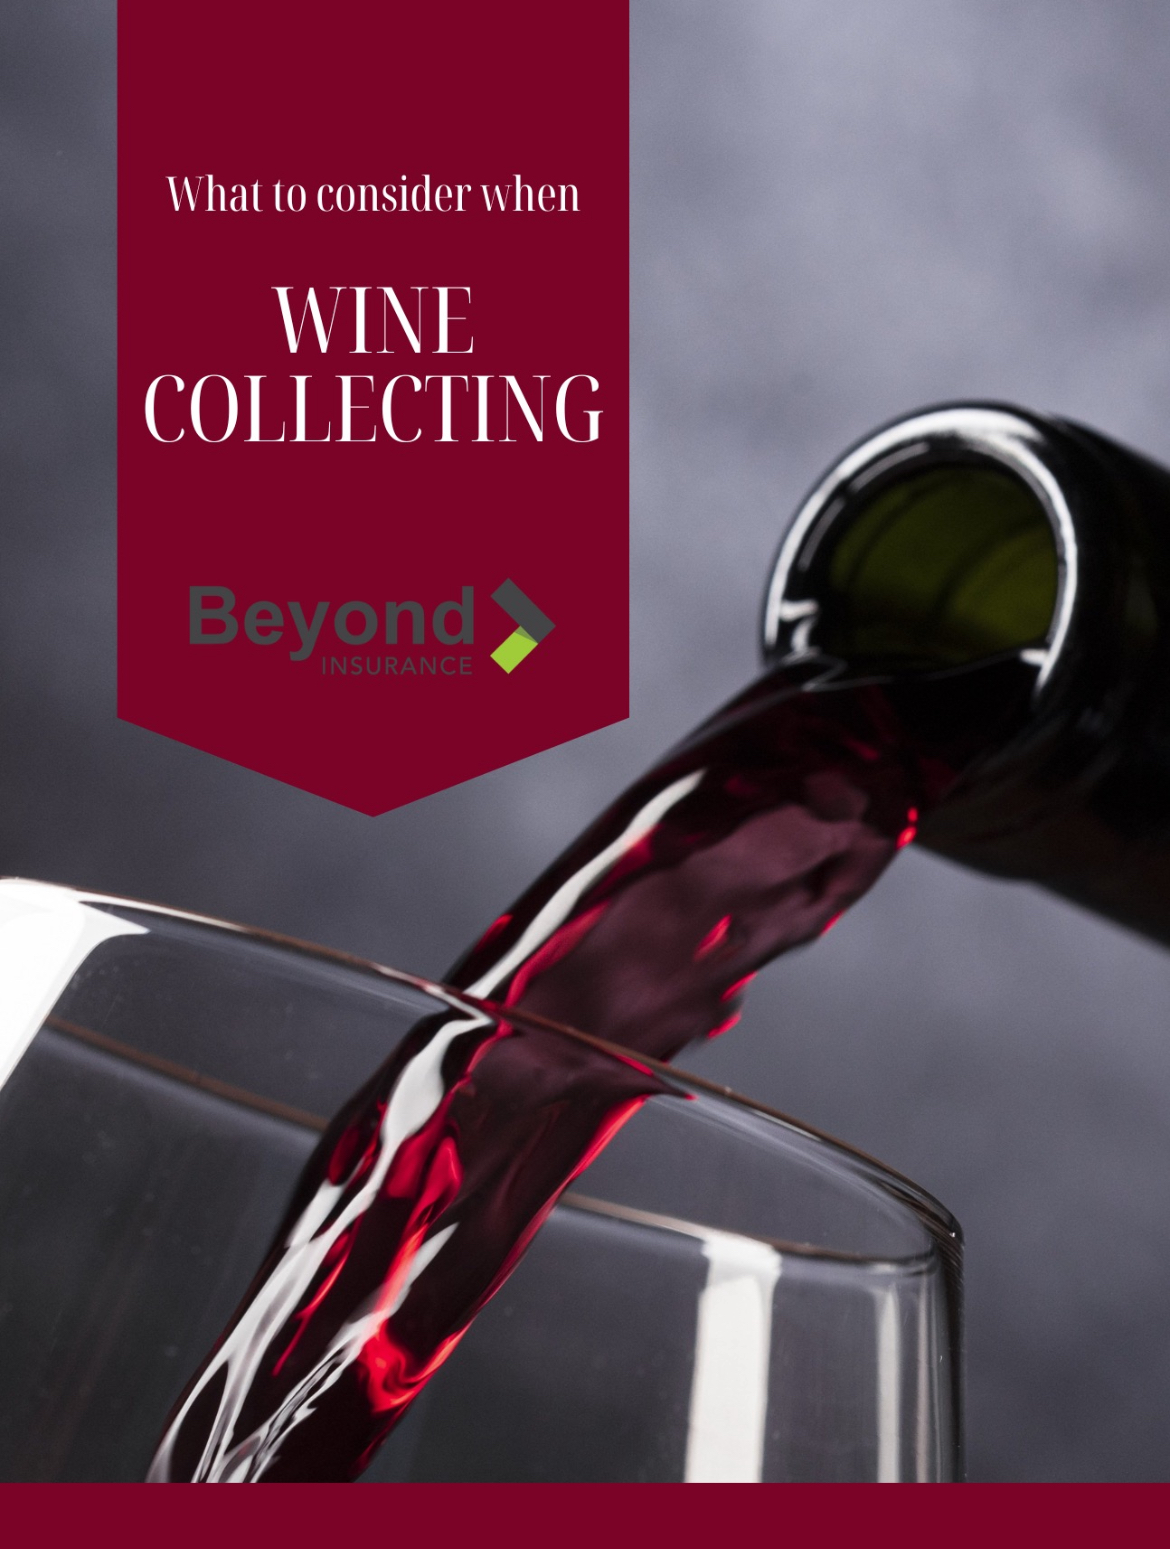 Wine collecting tips